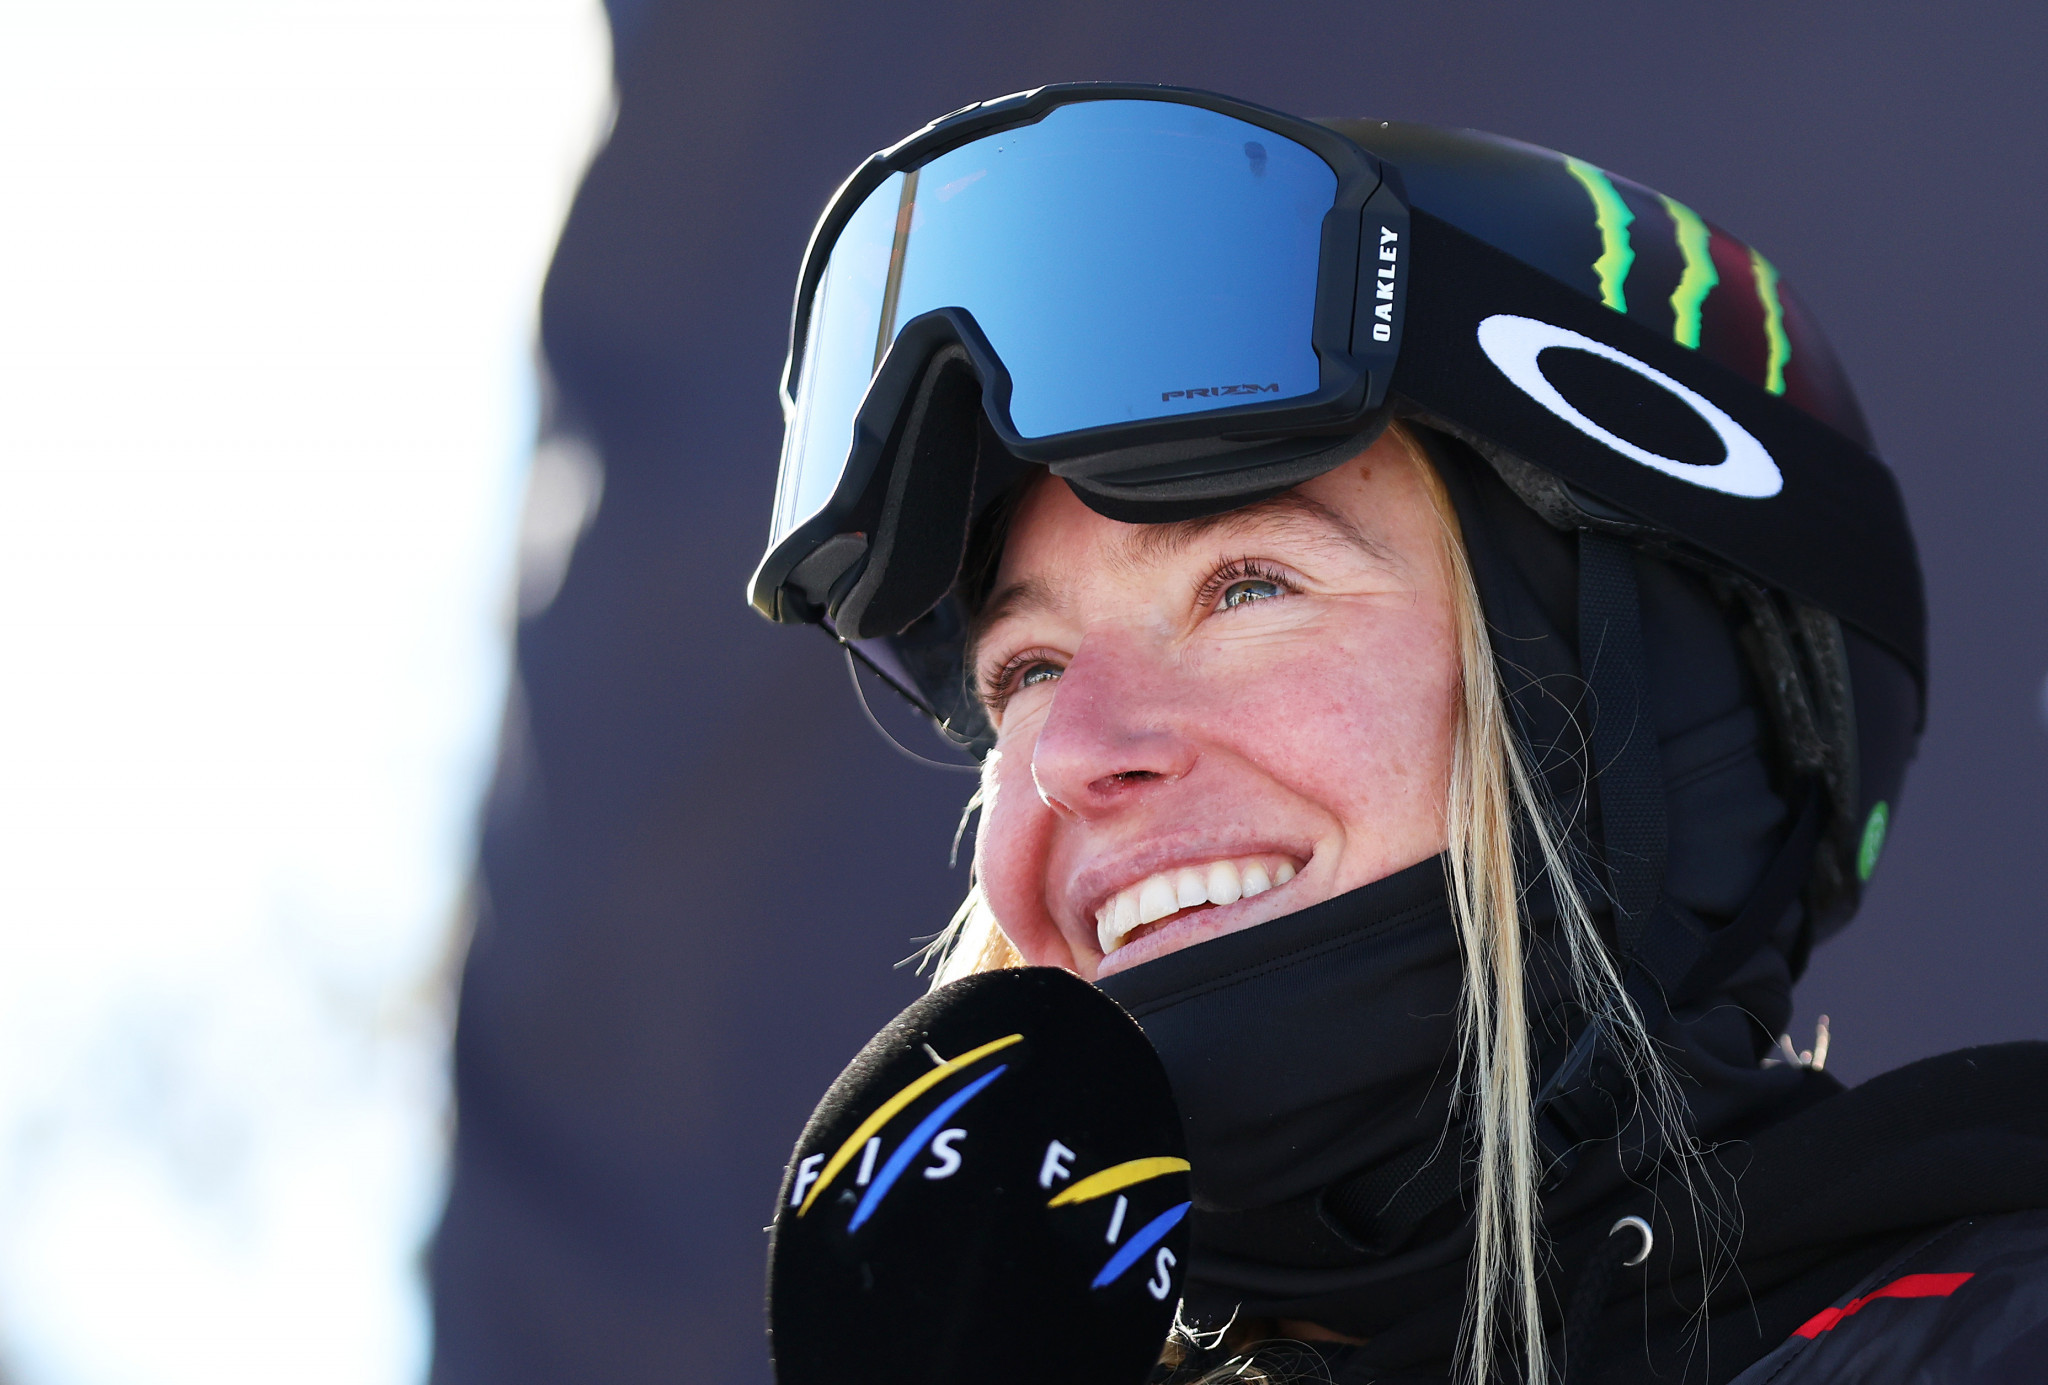 Jamie Anderson claimed victory in the women's snowboard slopestyle ©Getty Images